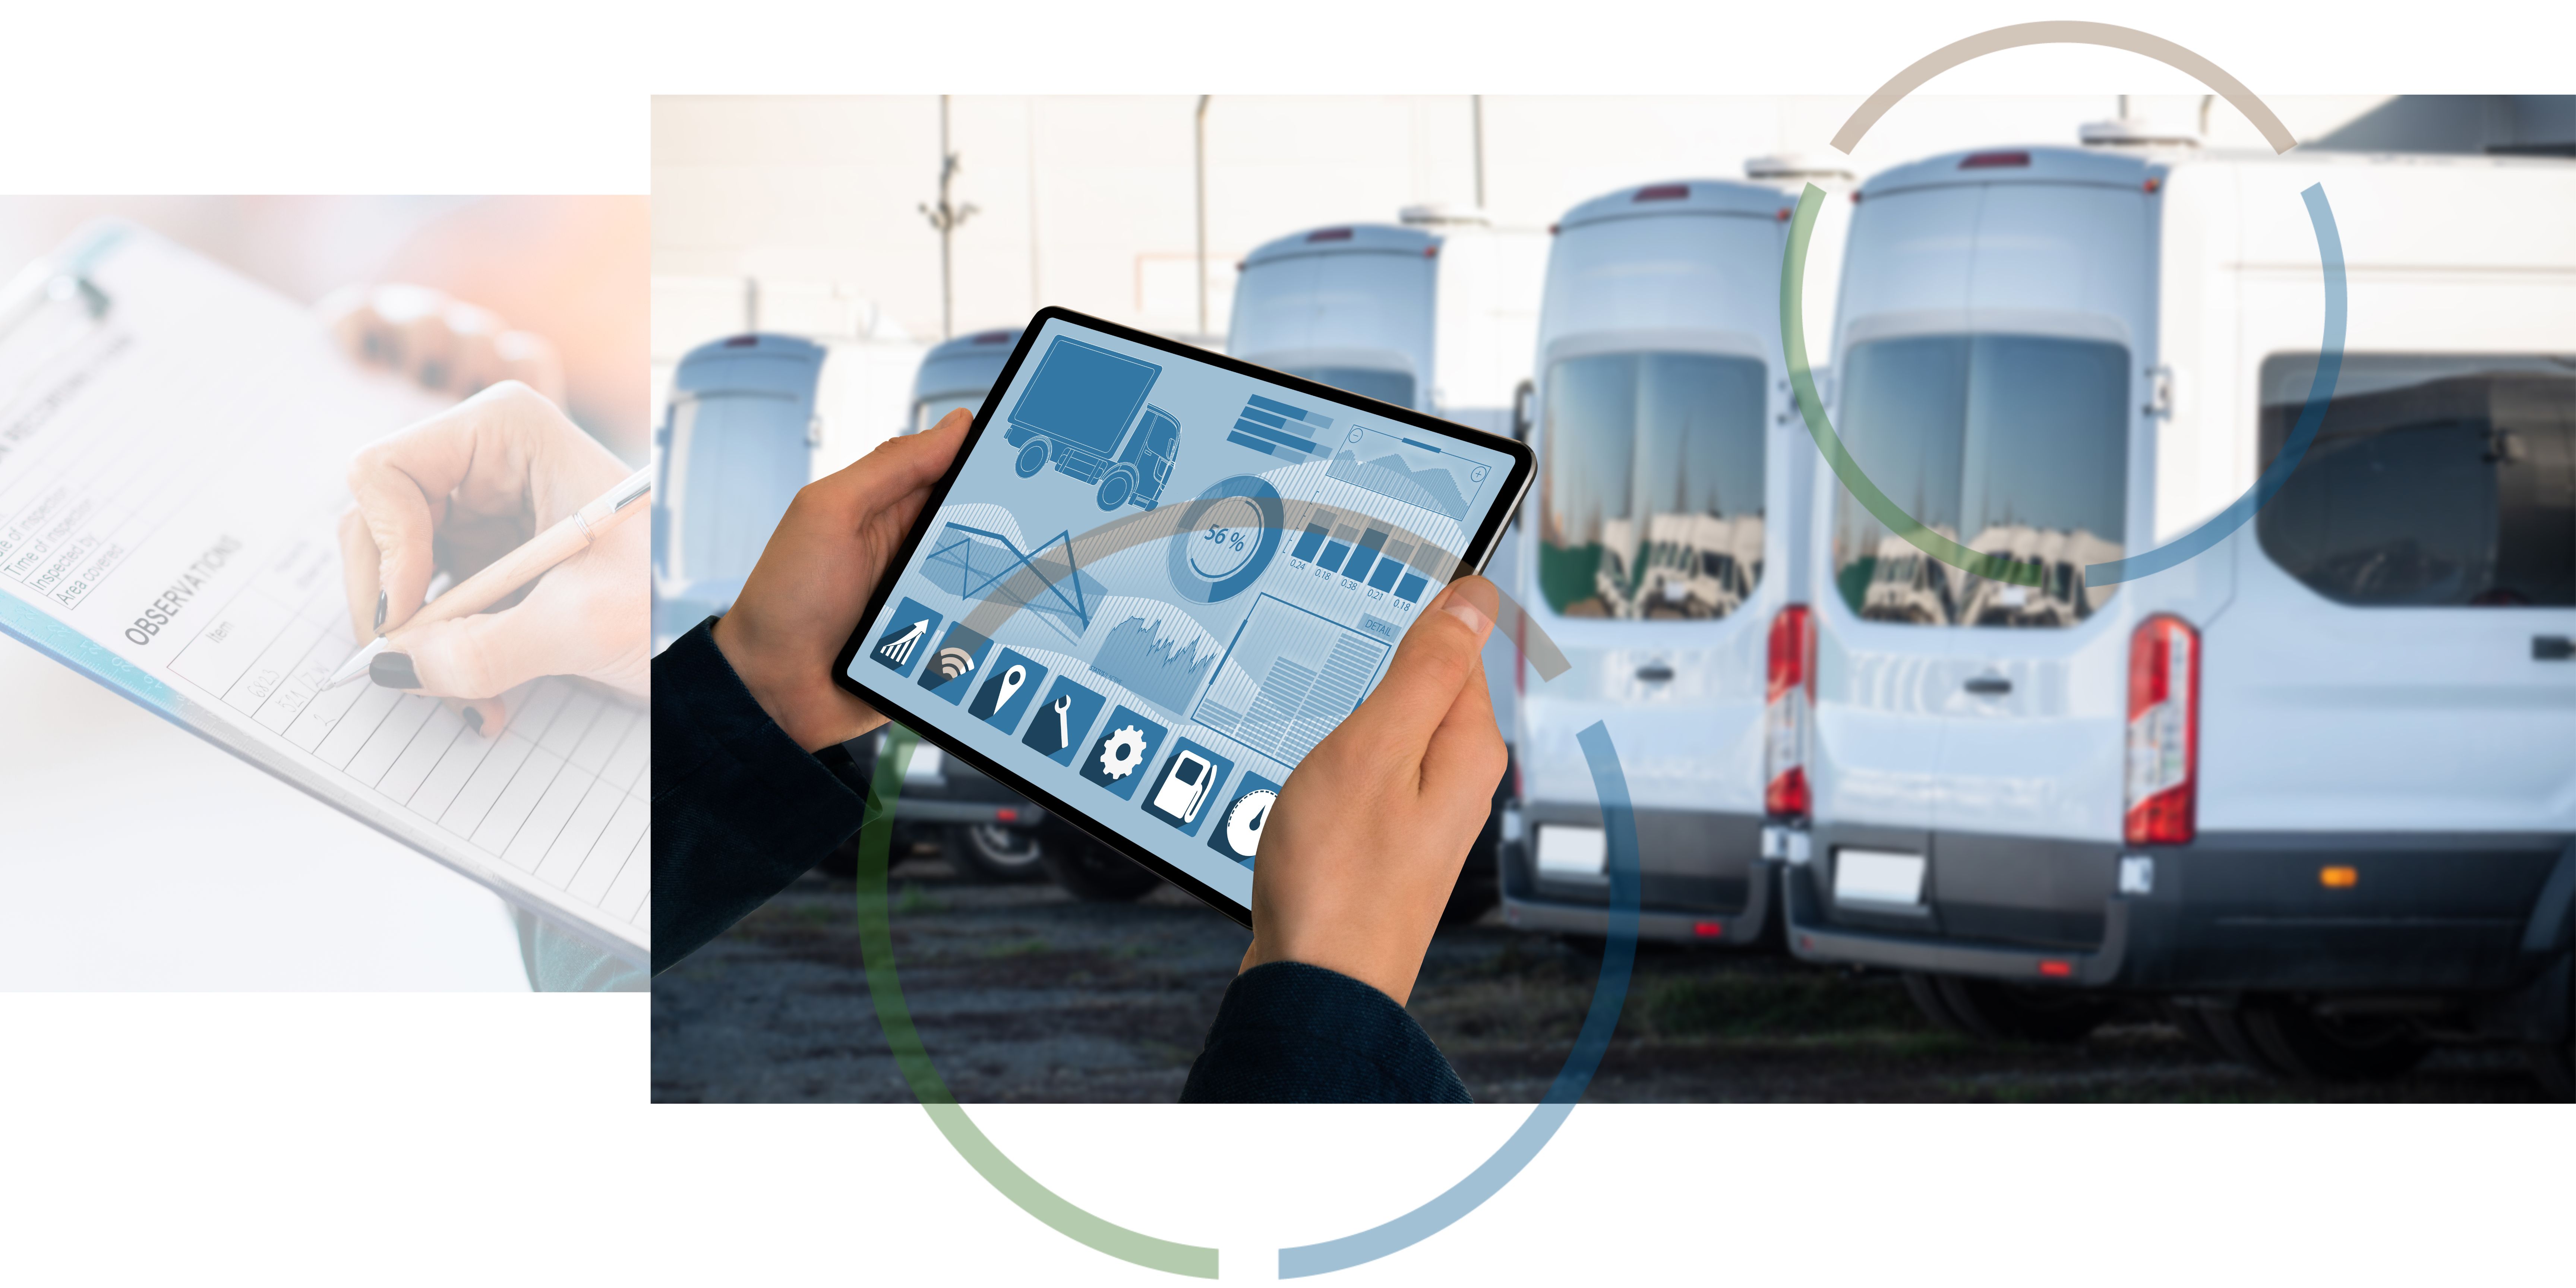 Hands holding a clipboard and hands holding a tablet in front of a row of vans.